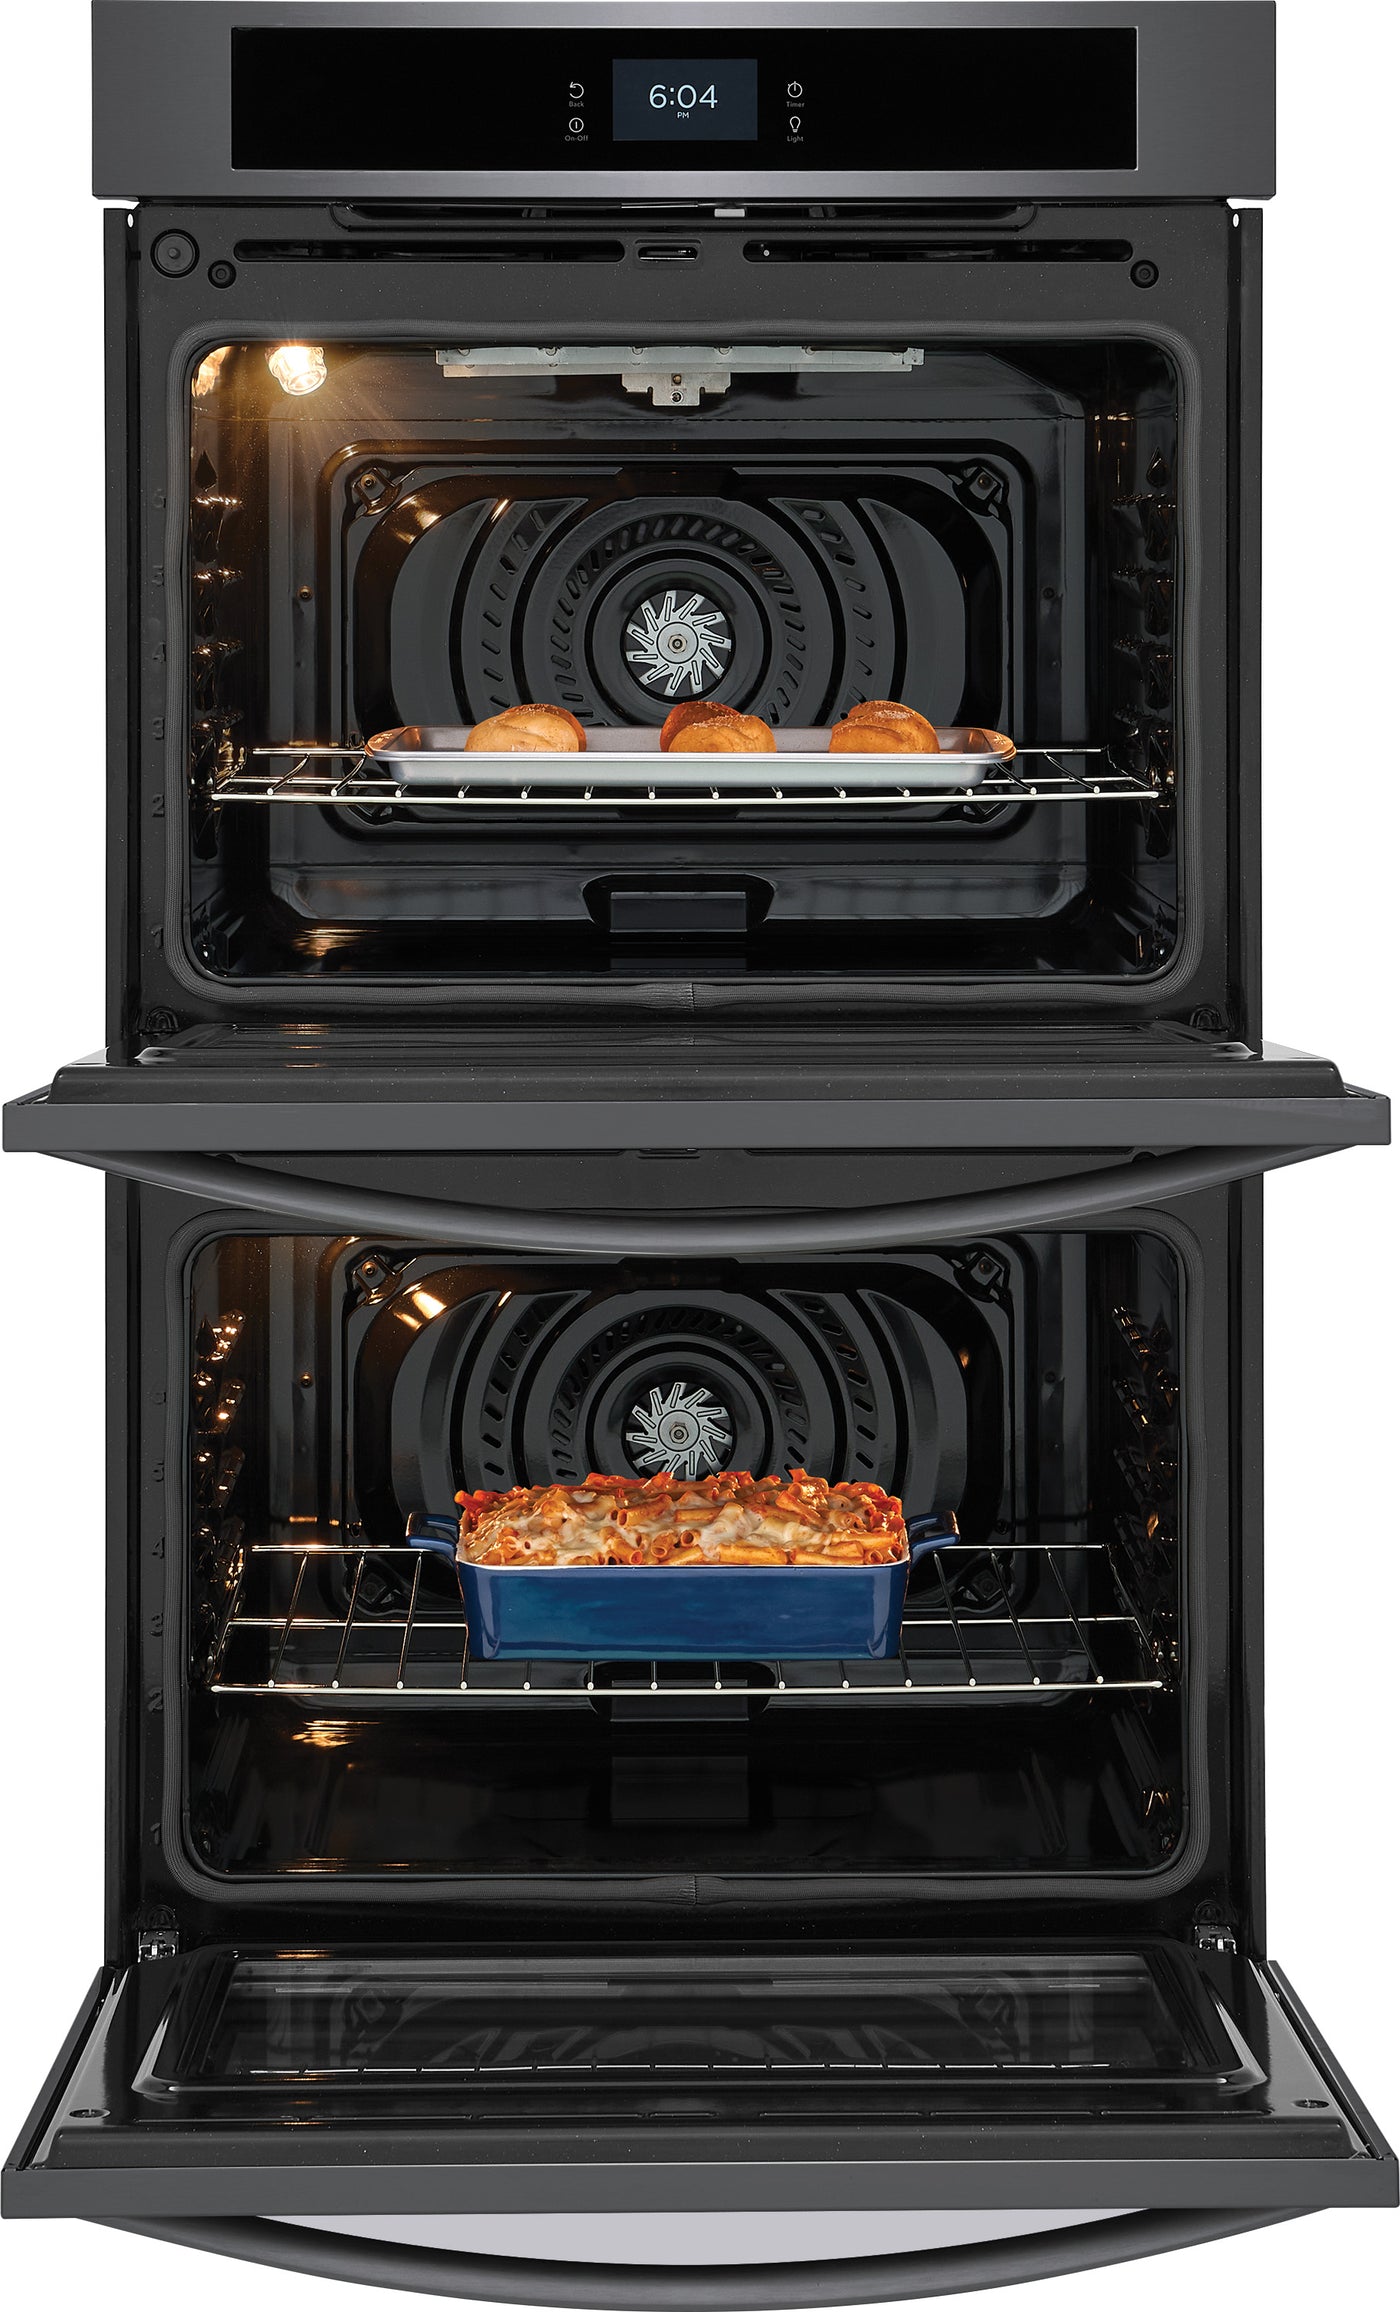 Frigidaire Black Stainless Steel 30" Double Wall Oven with Fan Convection (10.6 Cu. Ft) - FCWD3027AD